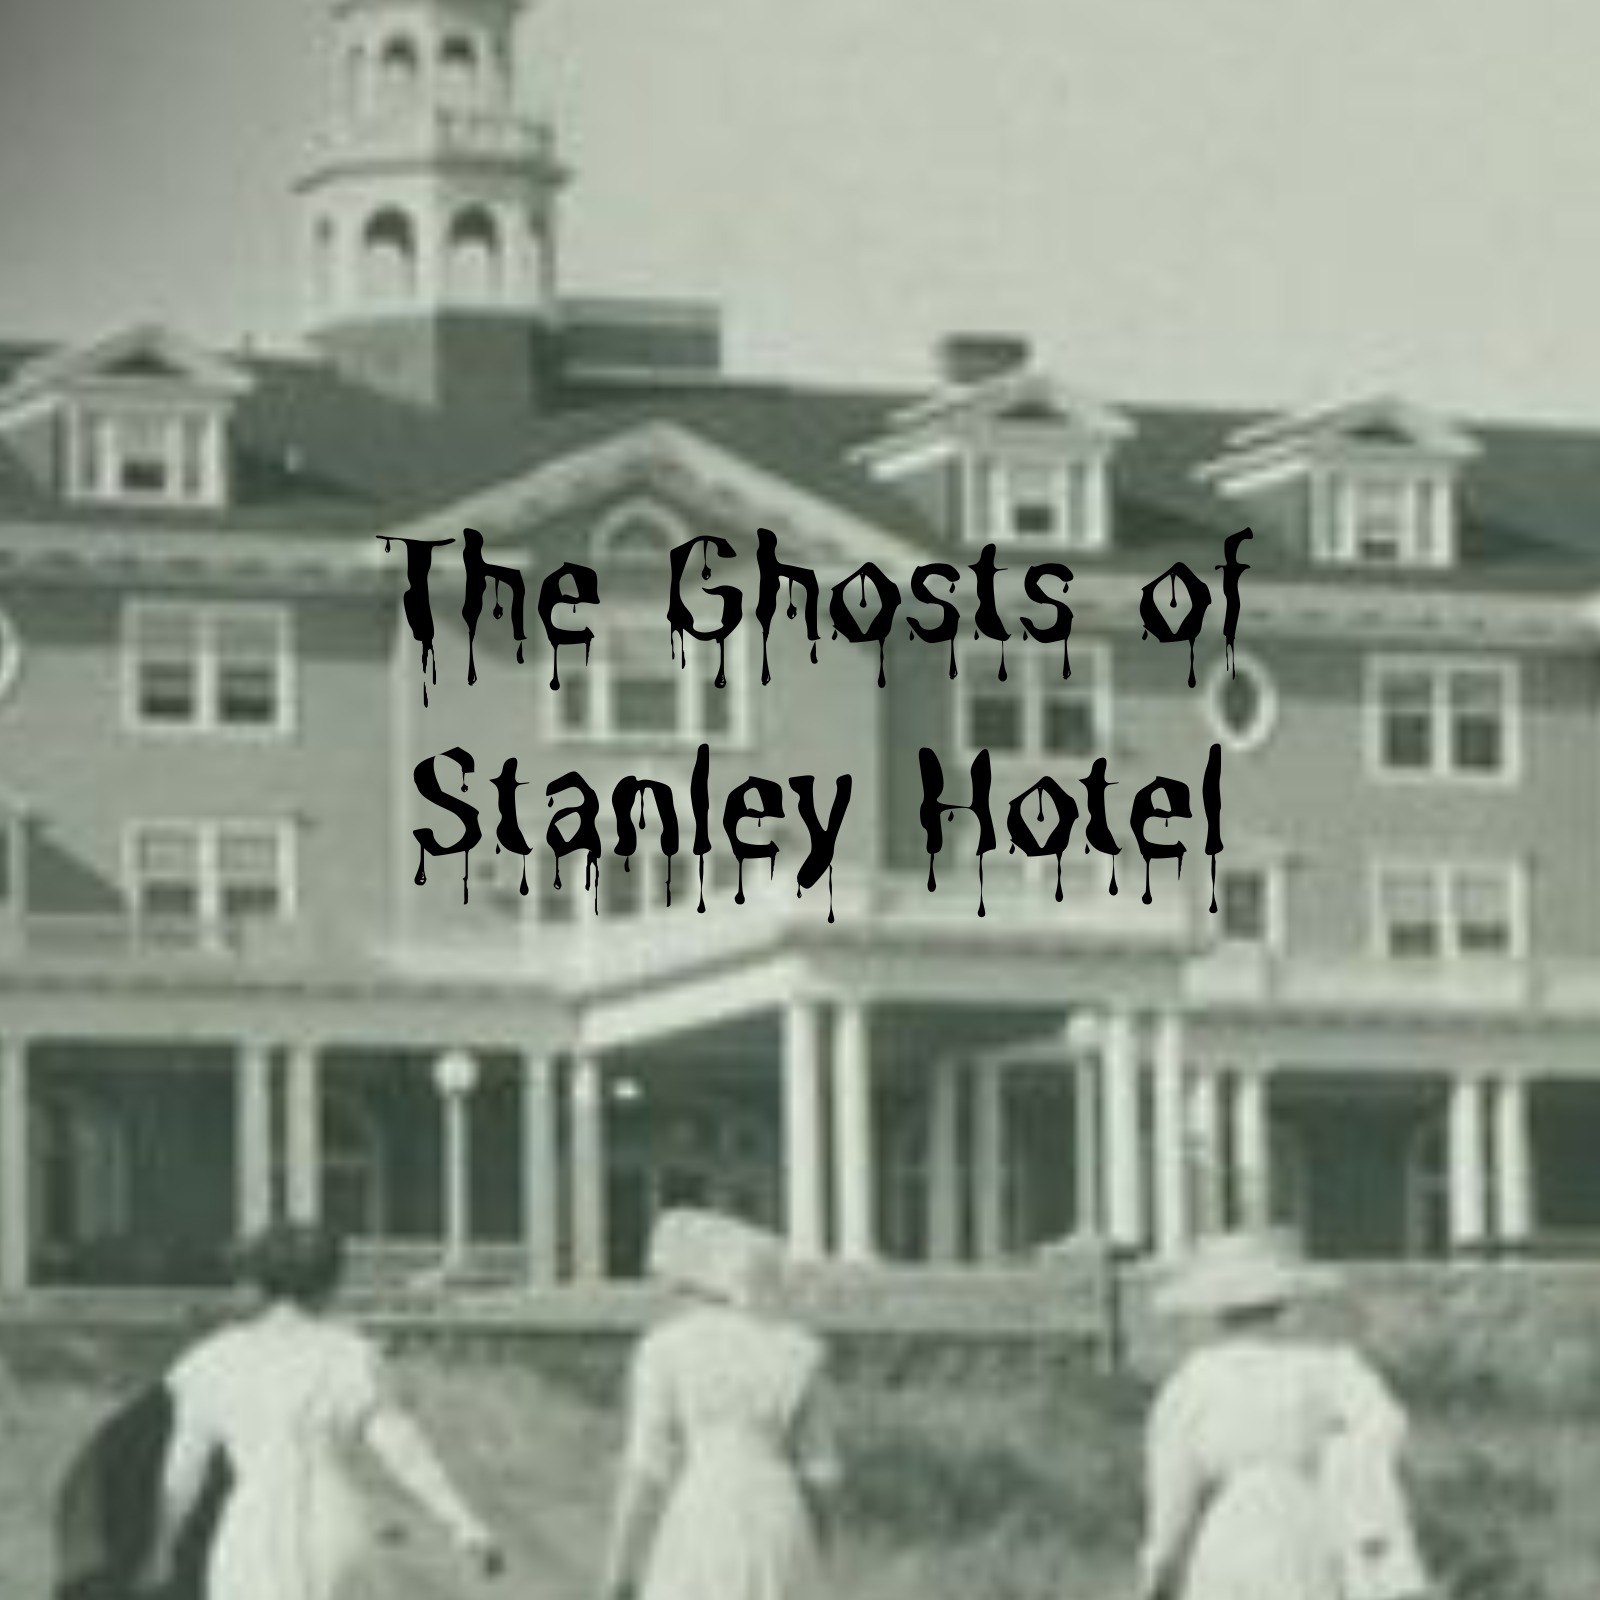 The Ghosts of Stanley Hotel